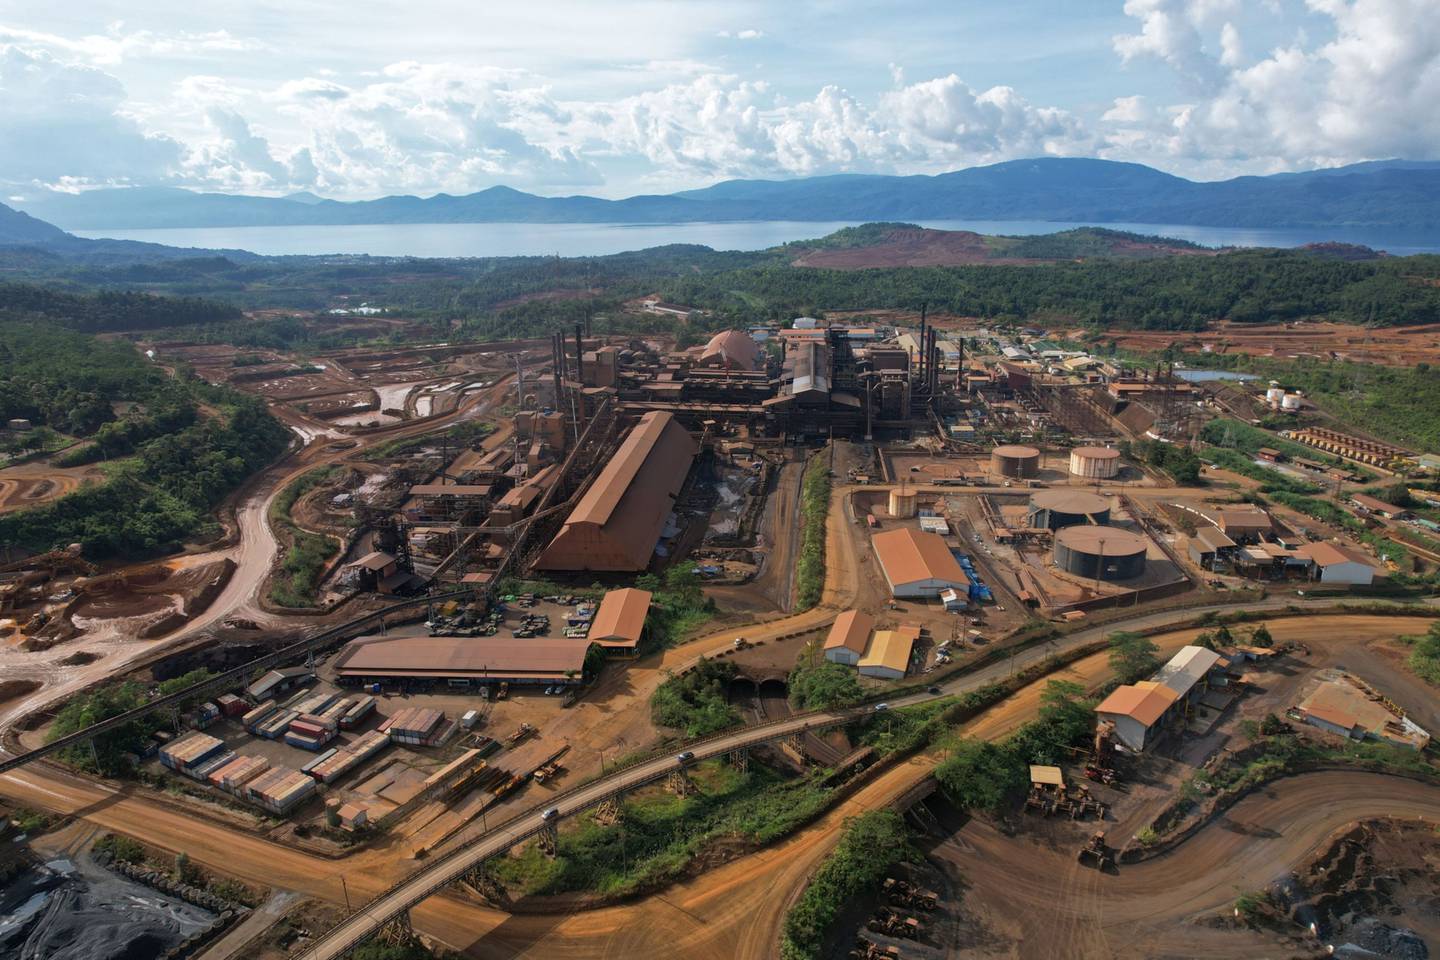 Vale, which makes most of its money from iron ore, has spent years trying to unlock what it sees as hidden value within its copper and nickel mines in Canada, Brazil and Indonesia.